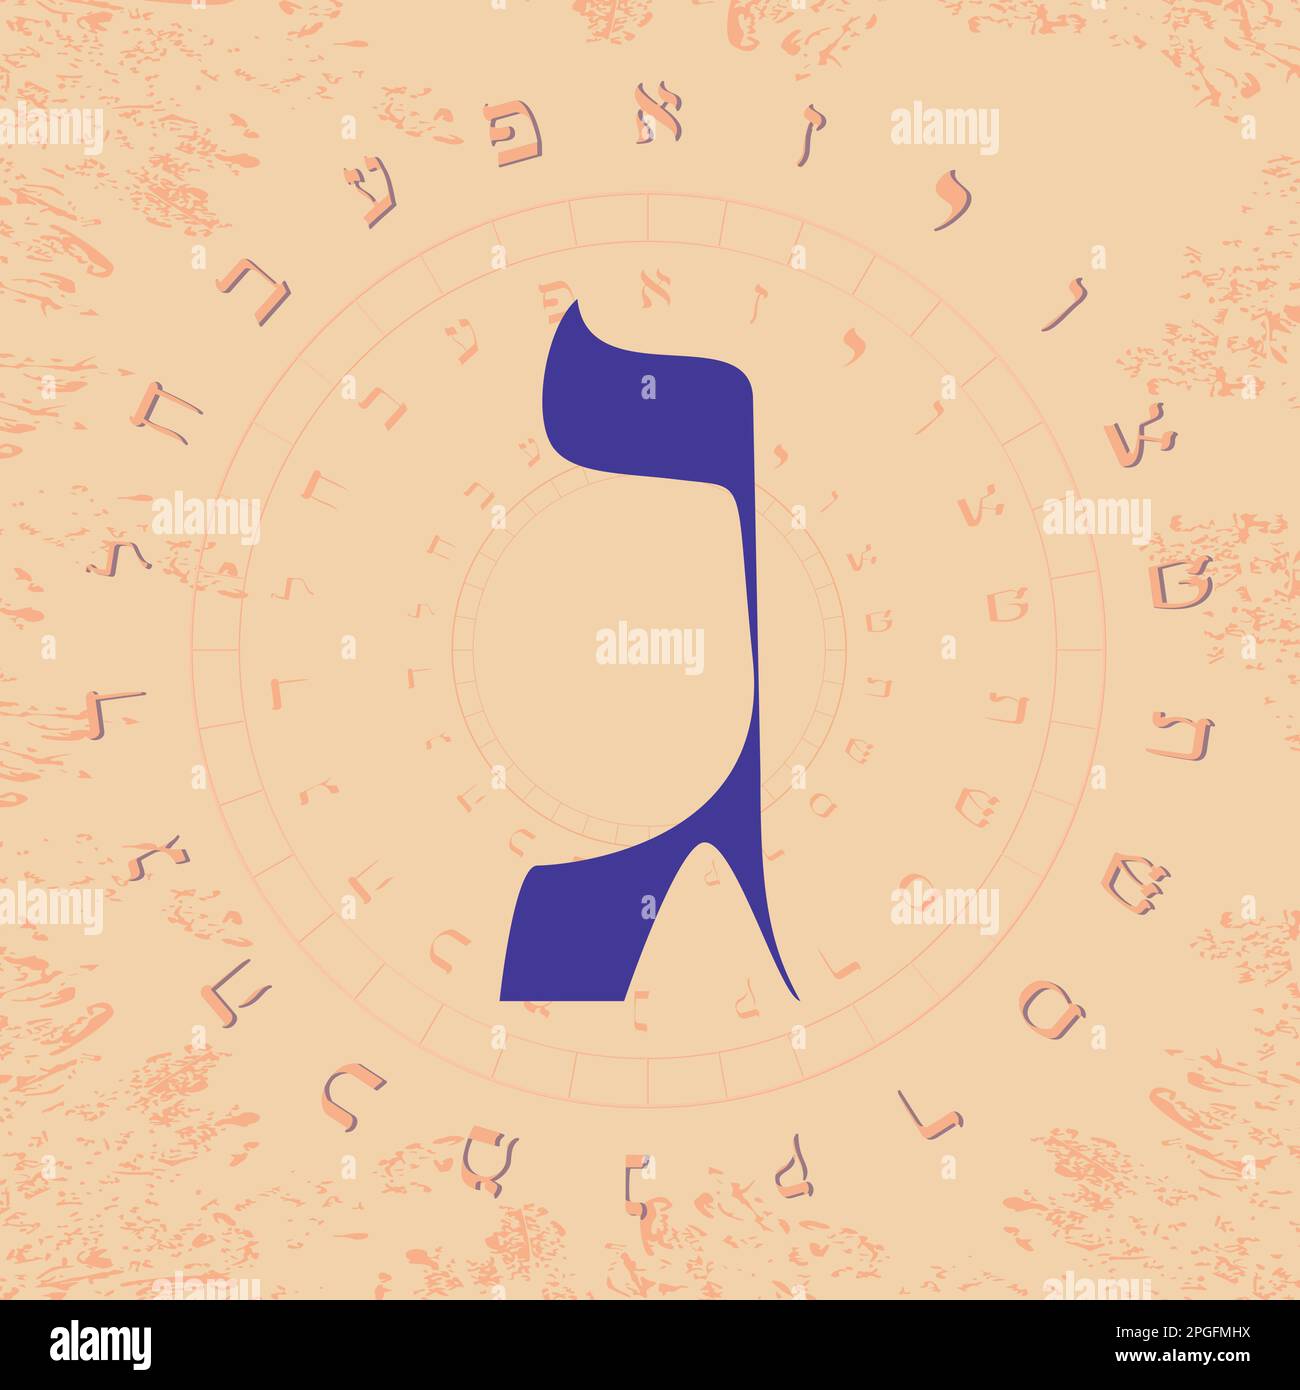 Vector illustration of the Hebrew alphabet in circular design. Hebrew letter called Gimel large and blue. Stock Vector